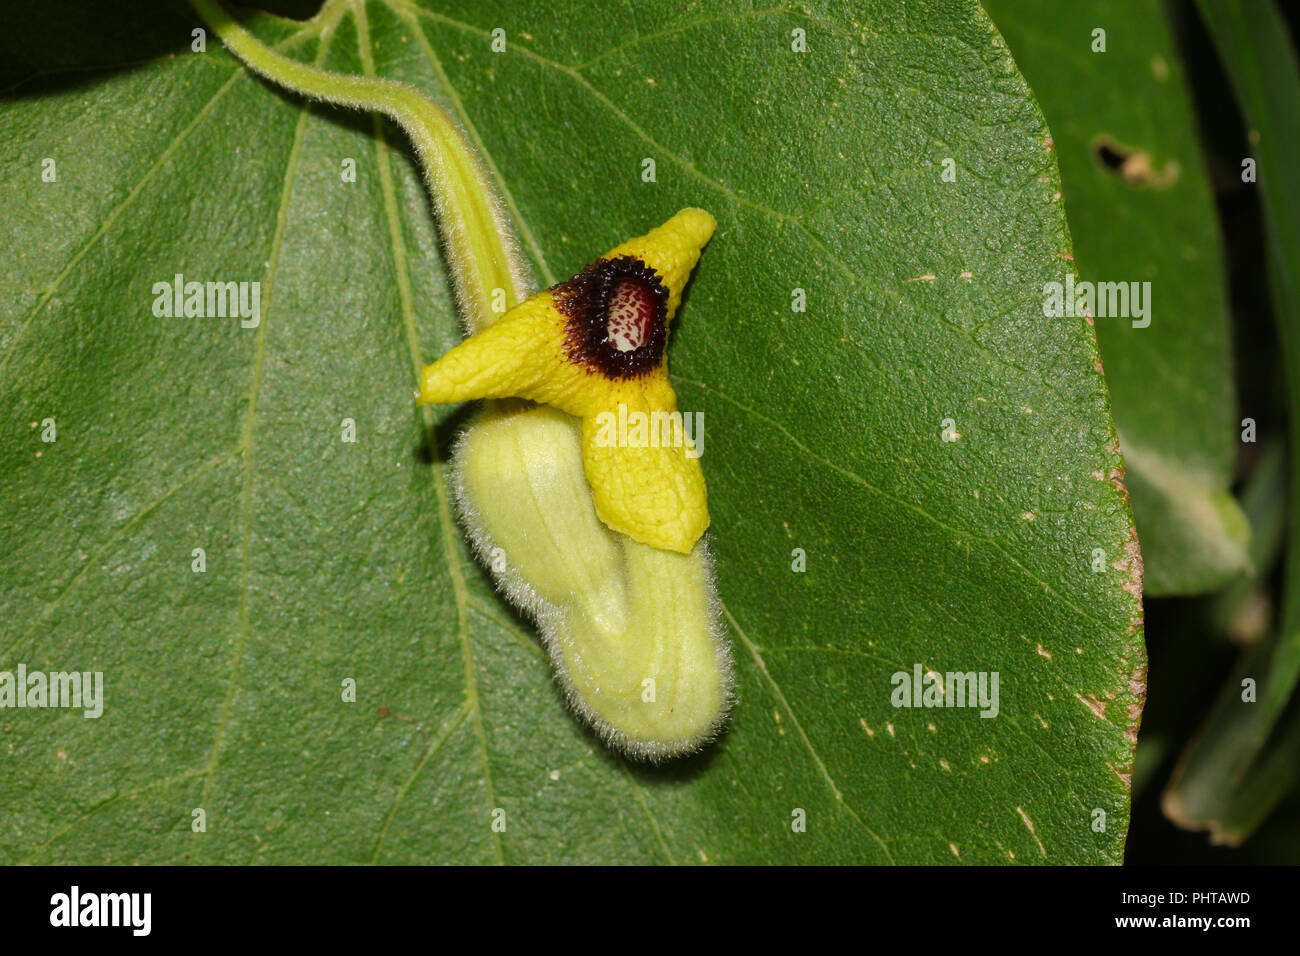 Close-up of a dutchman's pipe blossom. Stock Photo